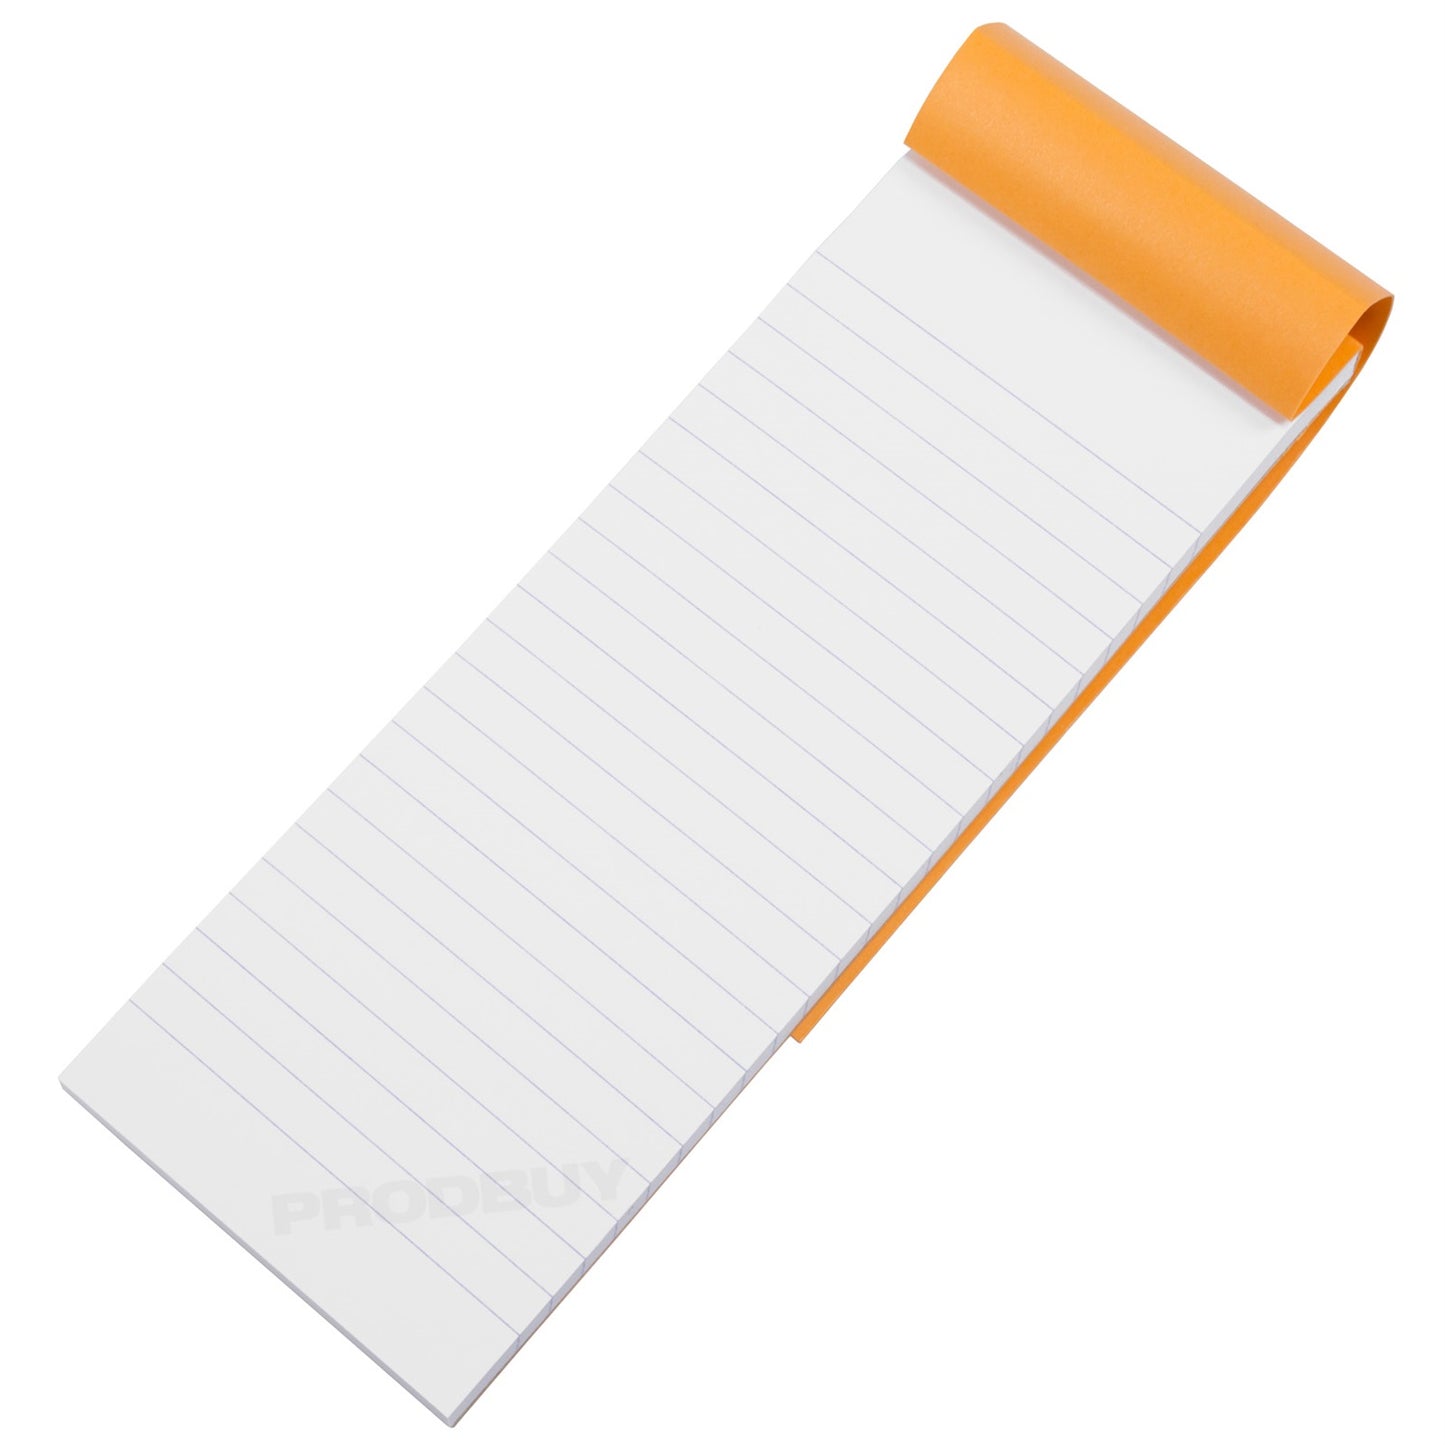 Rhodia Shopping Lid Notepad with Orange Faux Leather Sleeve